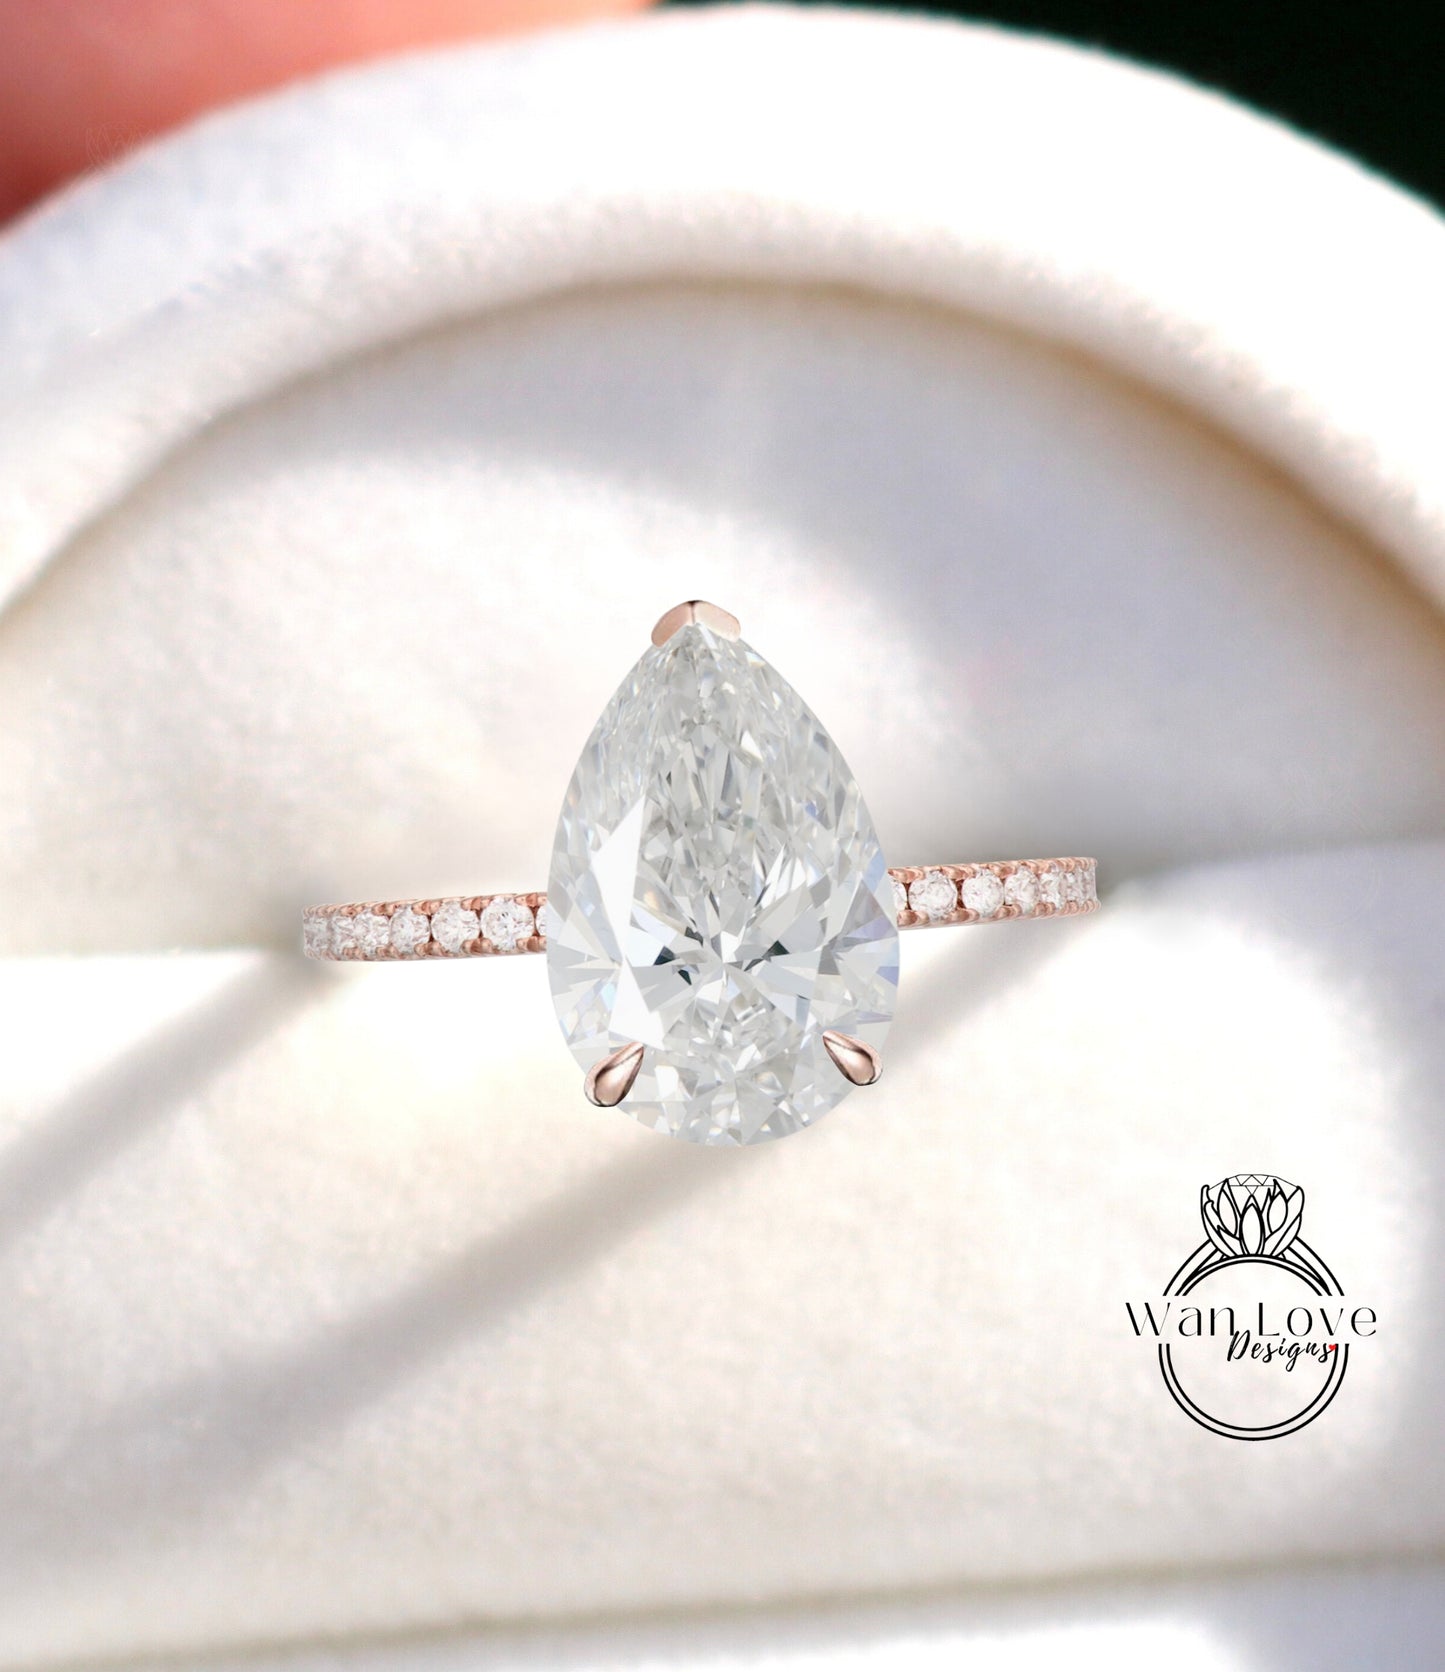 14K Solid Gold Engagement Ring/2ct Pear Moissanite Diamond Wedding Ring/Moissanite Engagement Ring/Stacking Ring/Promise ring/Rose gold ring